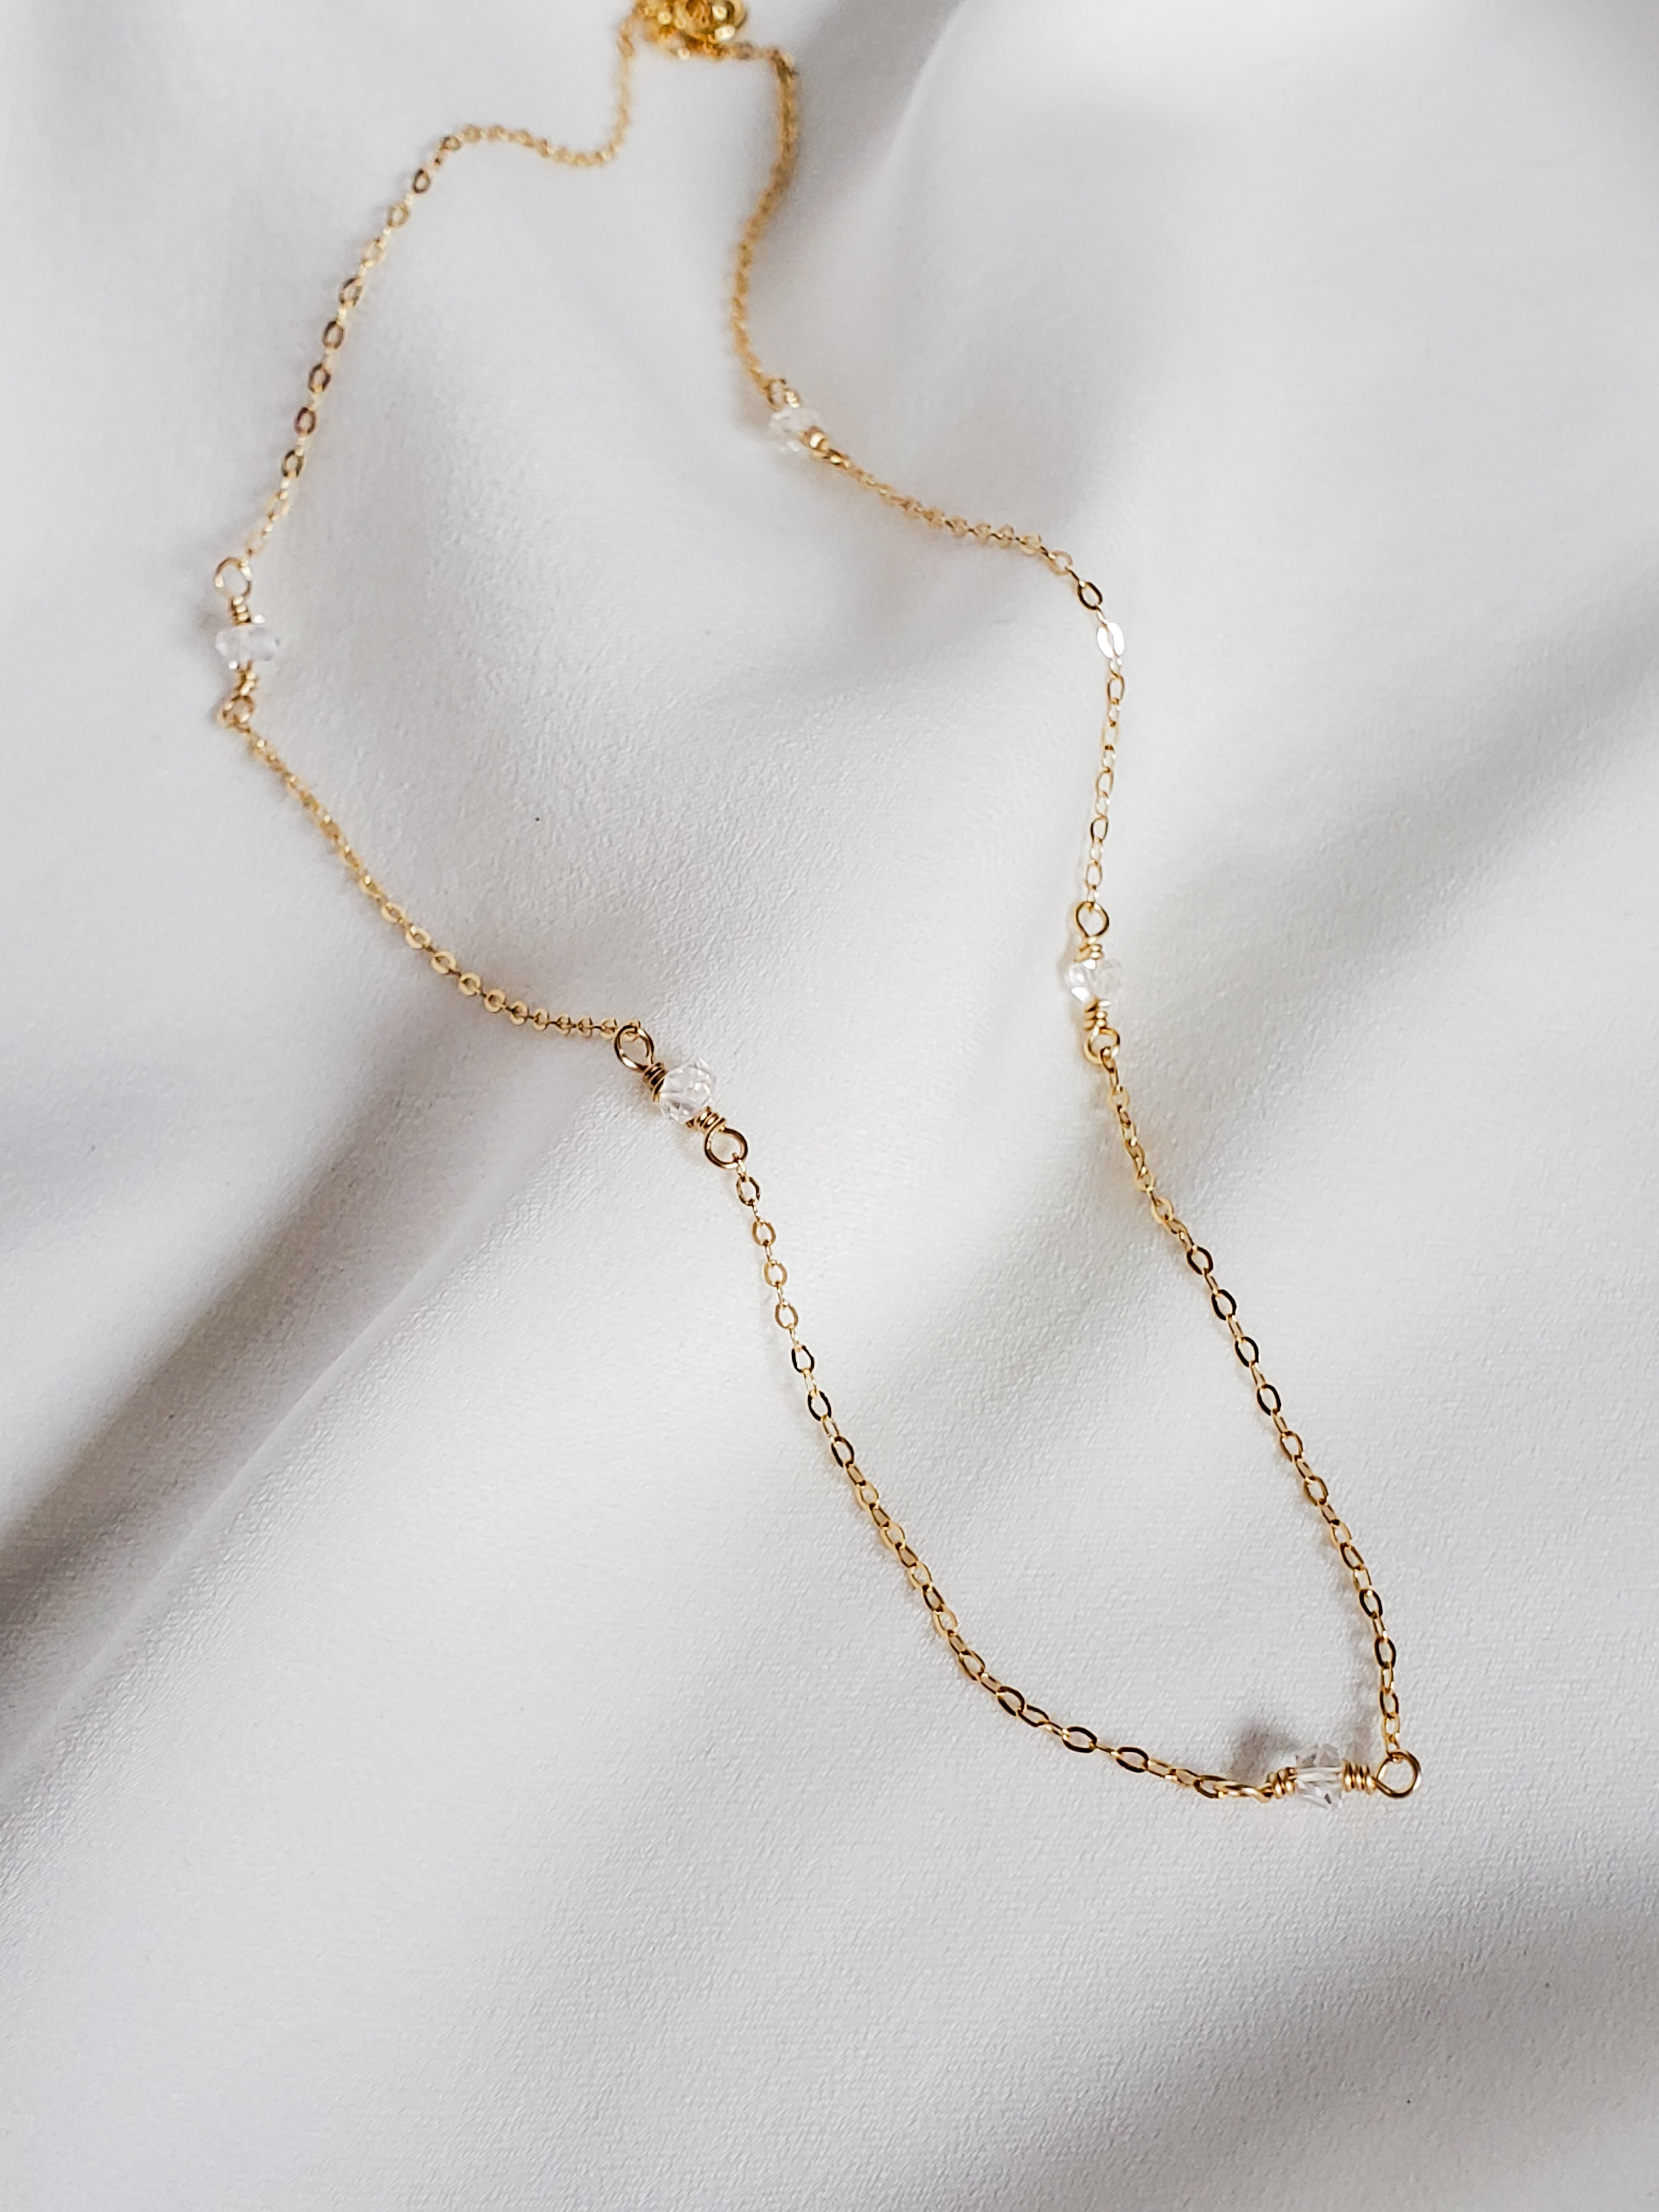 Champagne Necklace